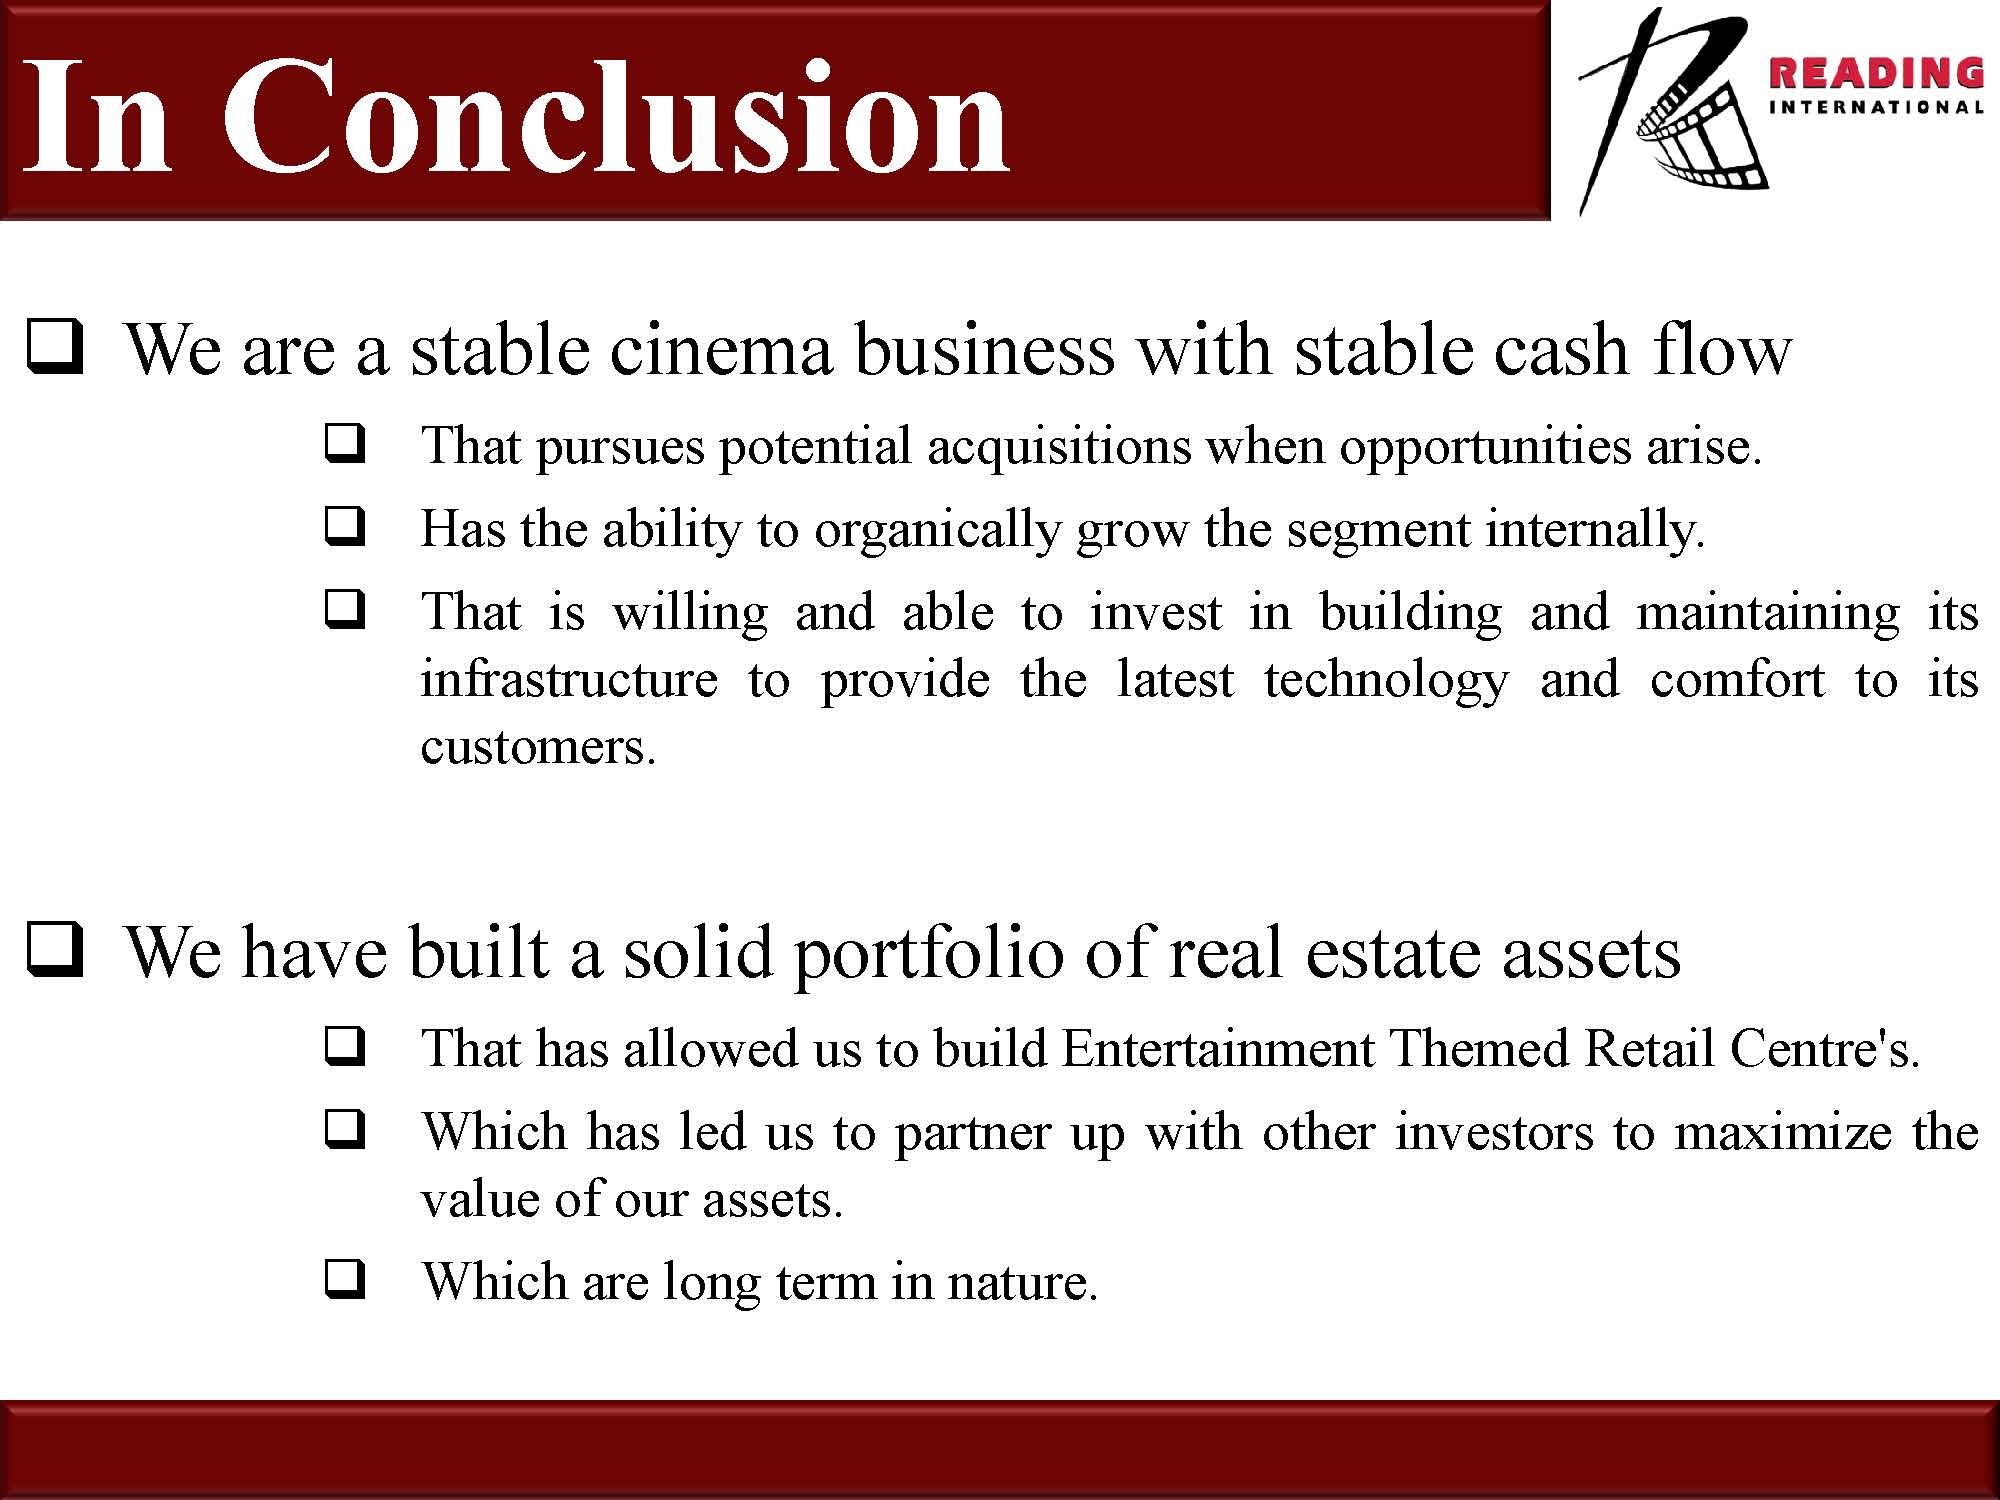 Y:\Susan\IDEAS presentation\Reading Int. IDEAS Investor Conference Aug 27 2013 - Final_Page_44.jpg